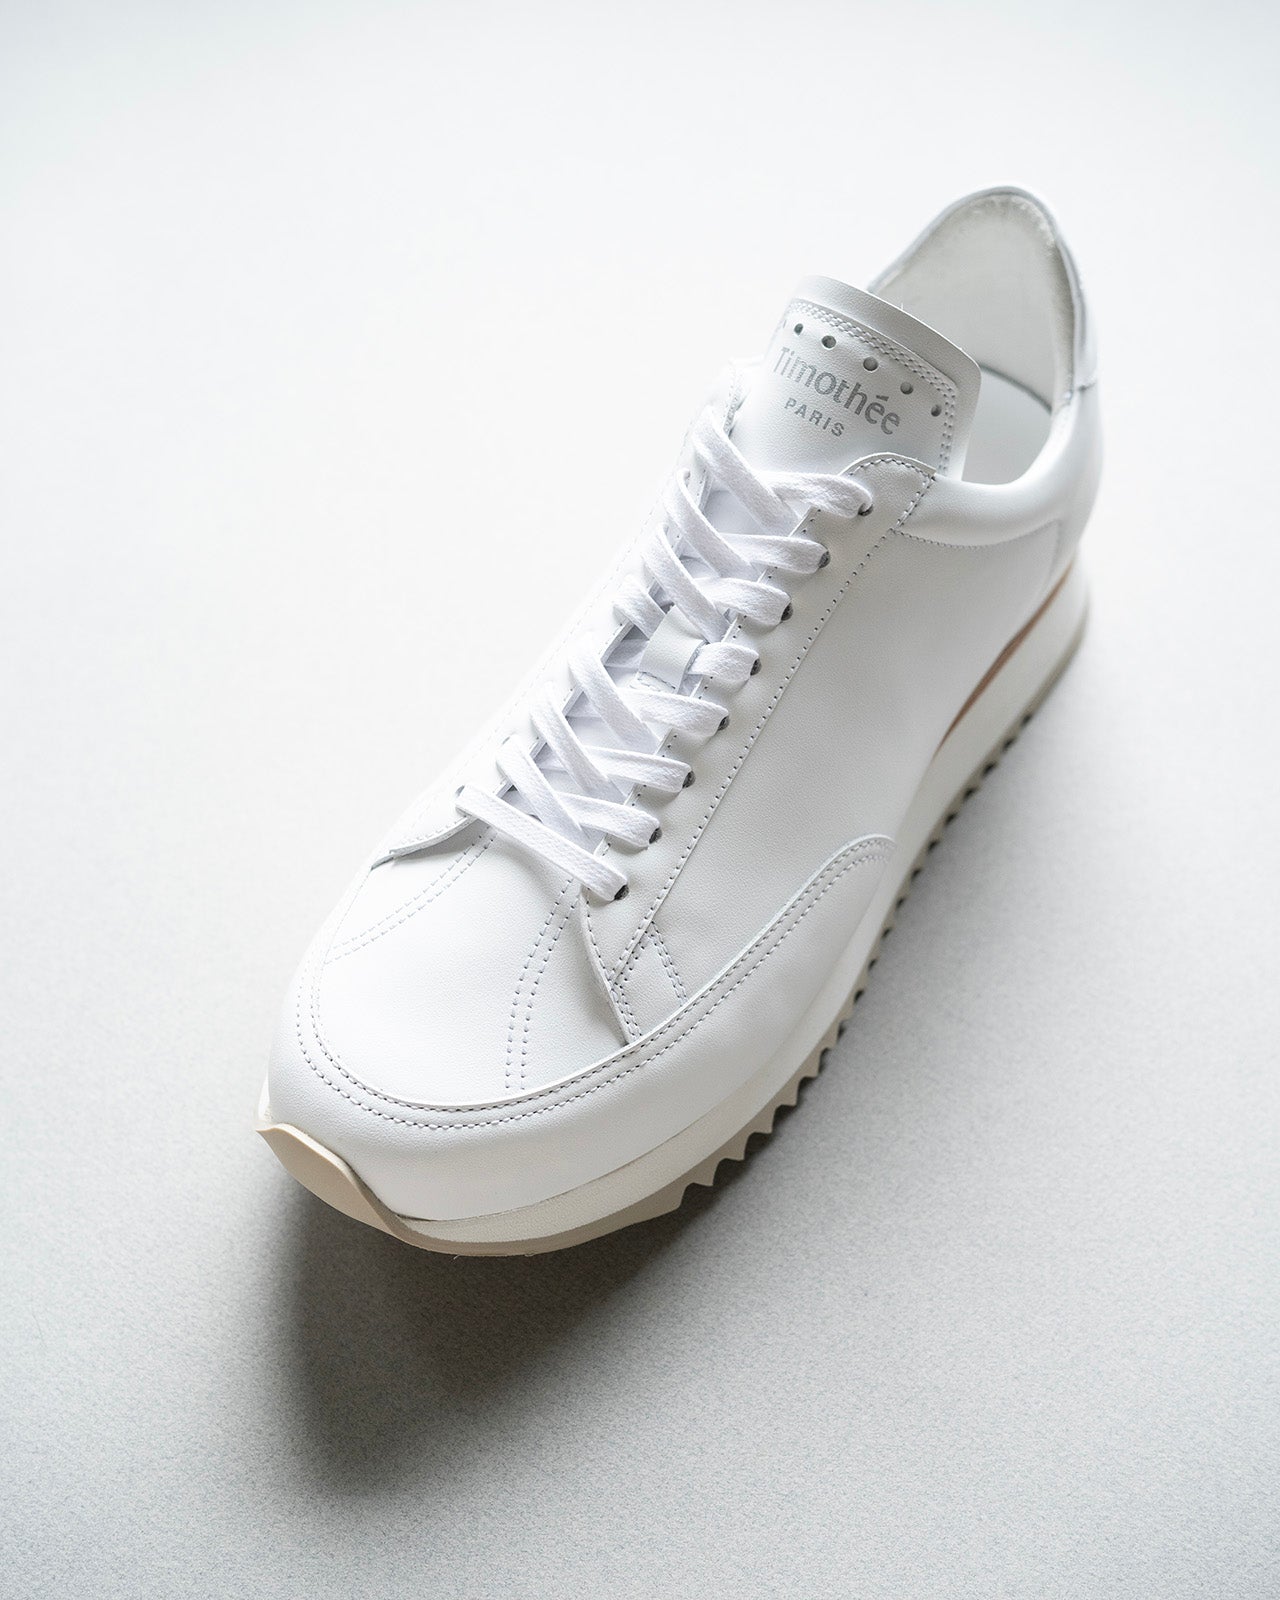 French brand Timothee Paris sneaker cabourg white still life photo from quarter top